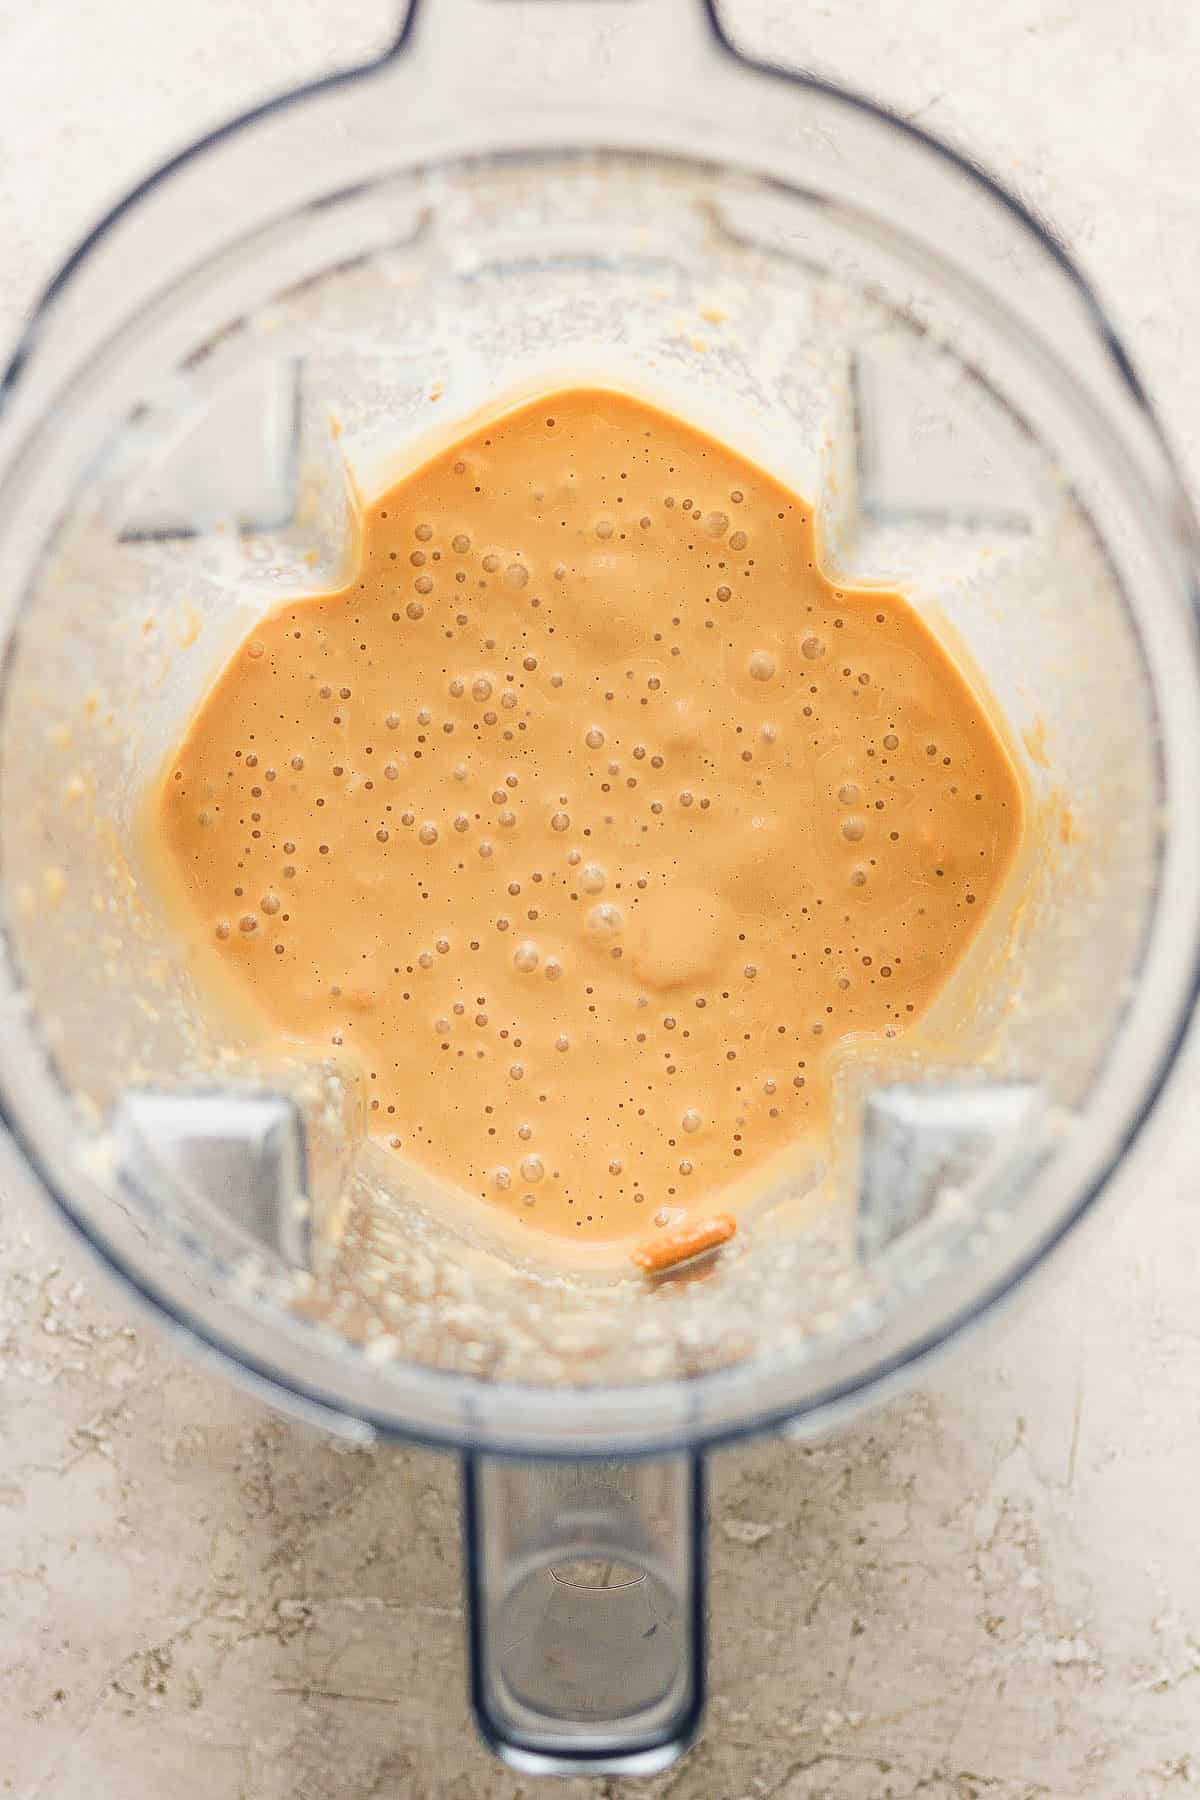 Blended galletas marias and evaporated milk in a blender.